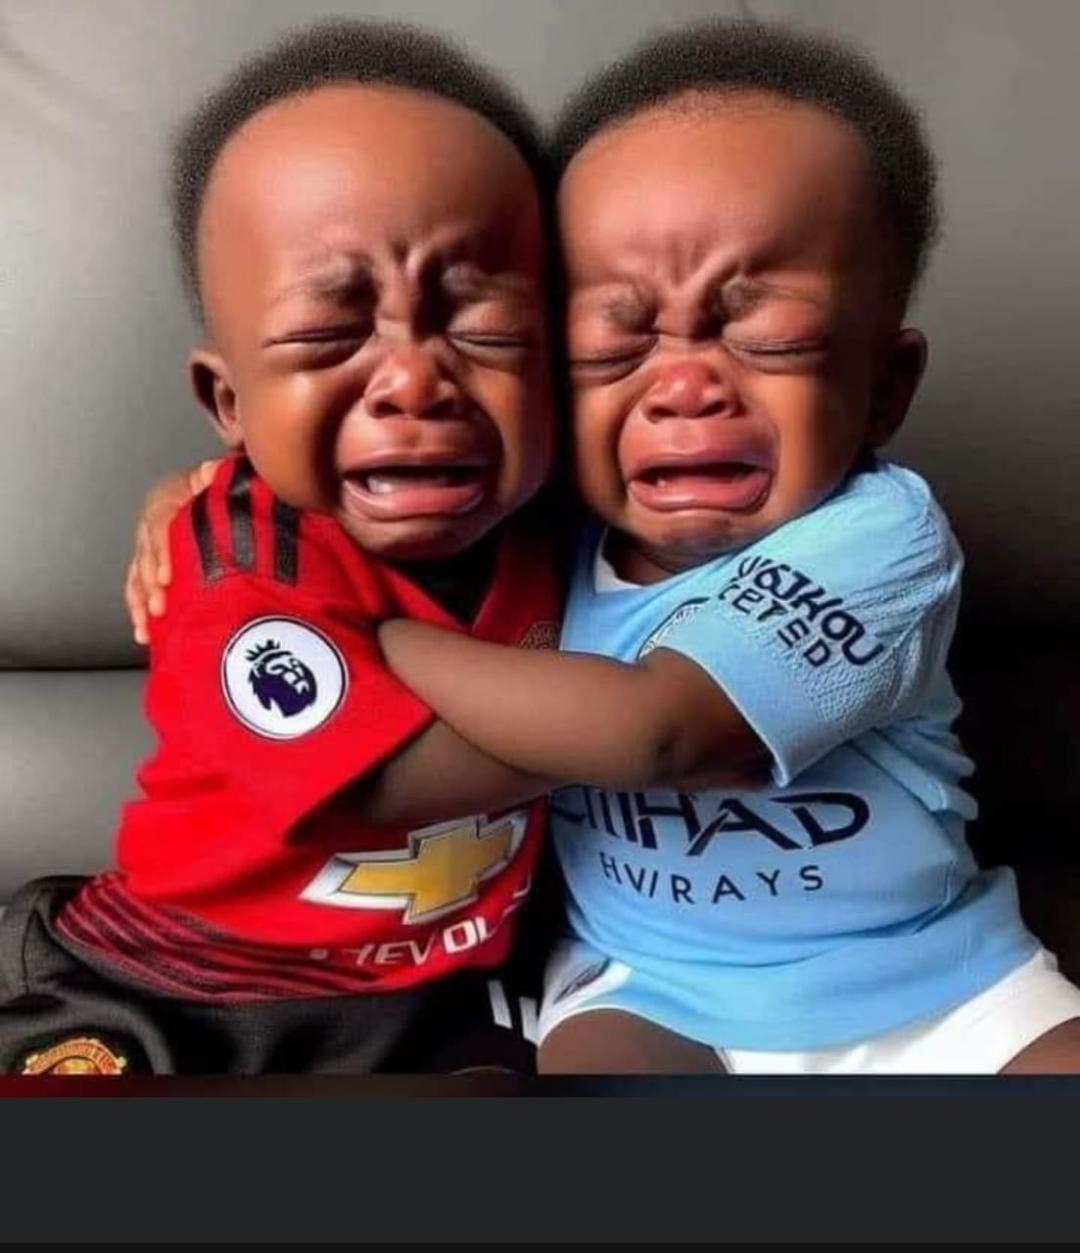 Manchester city united in grief